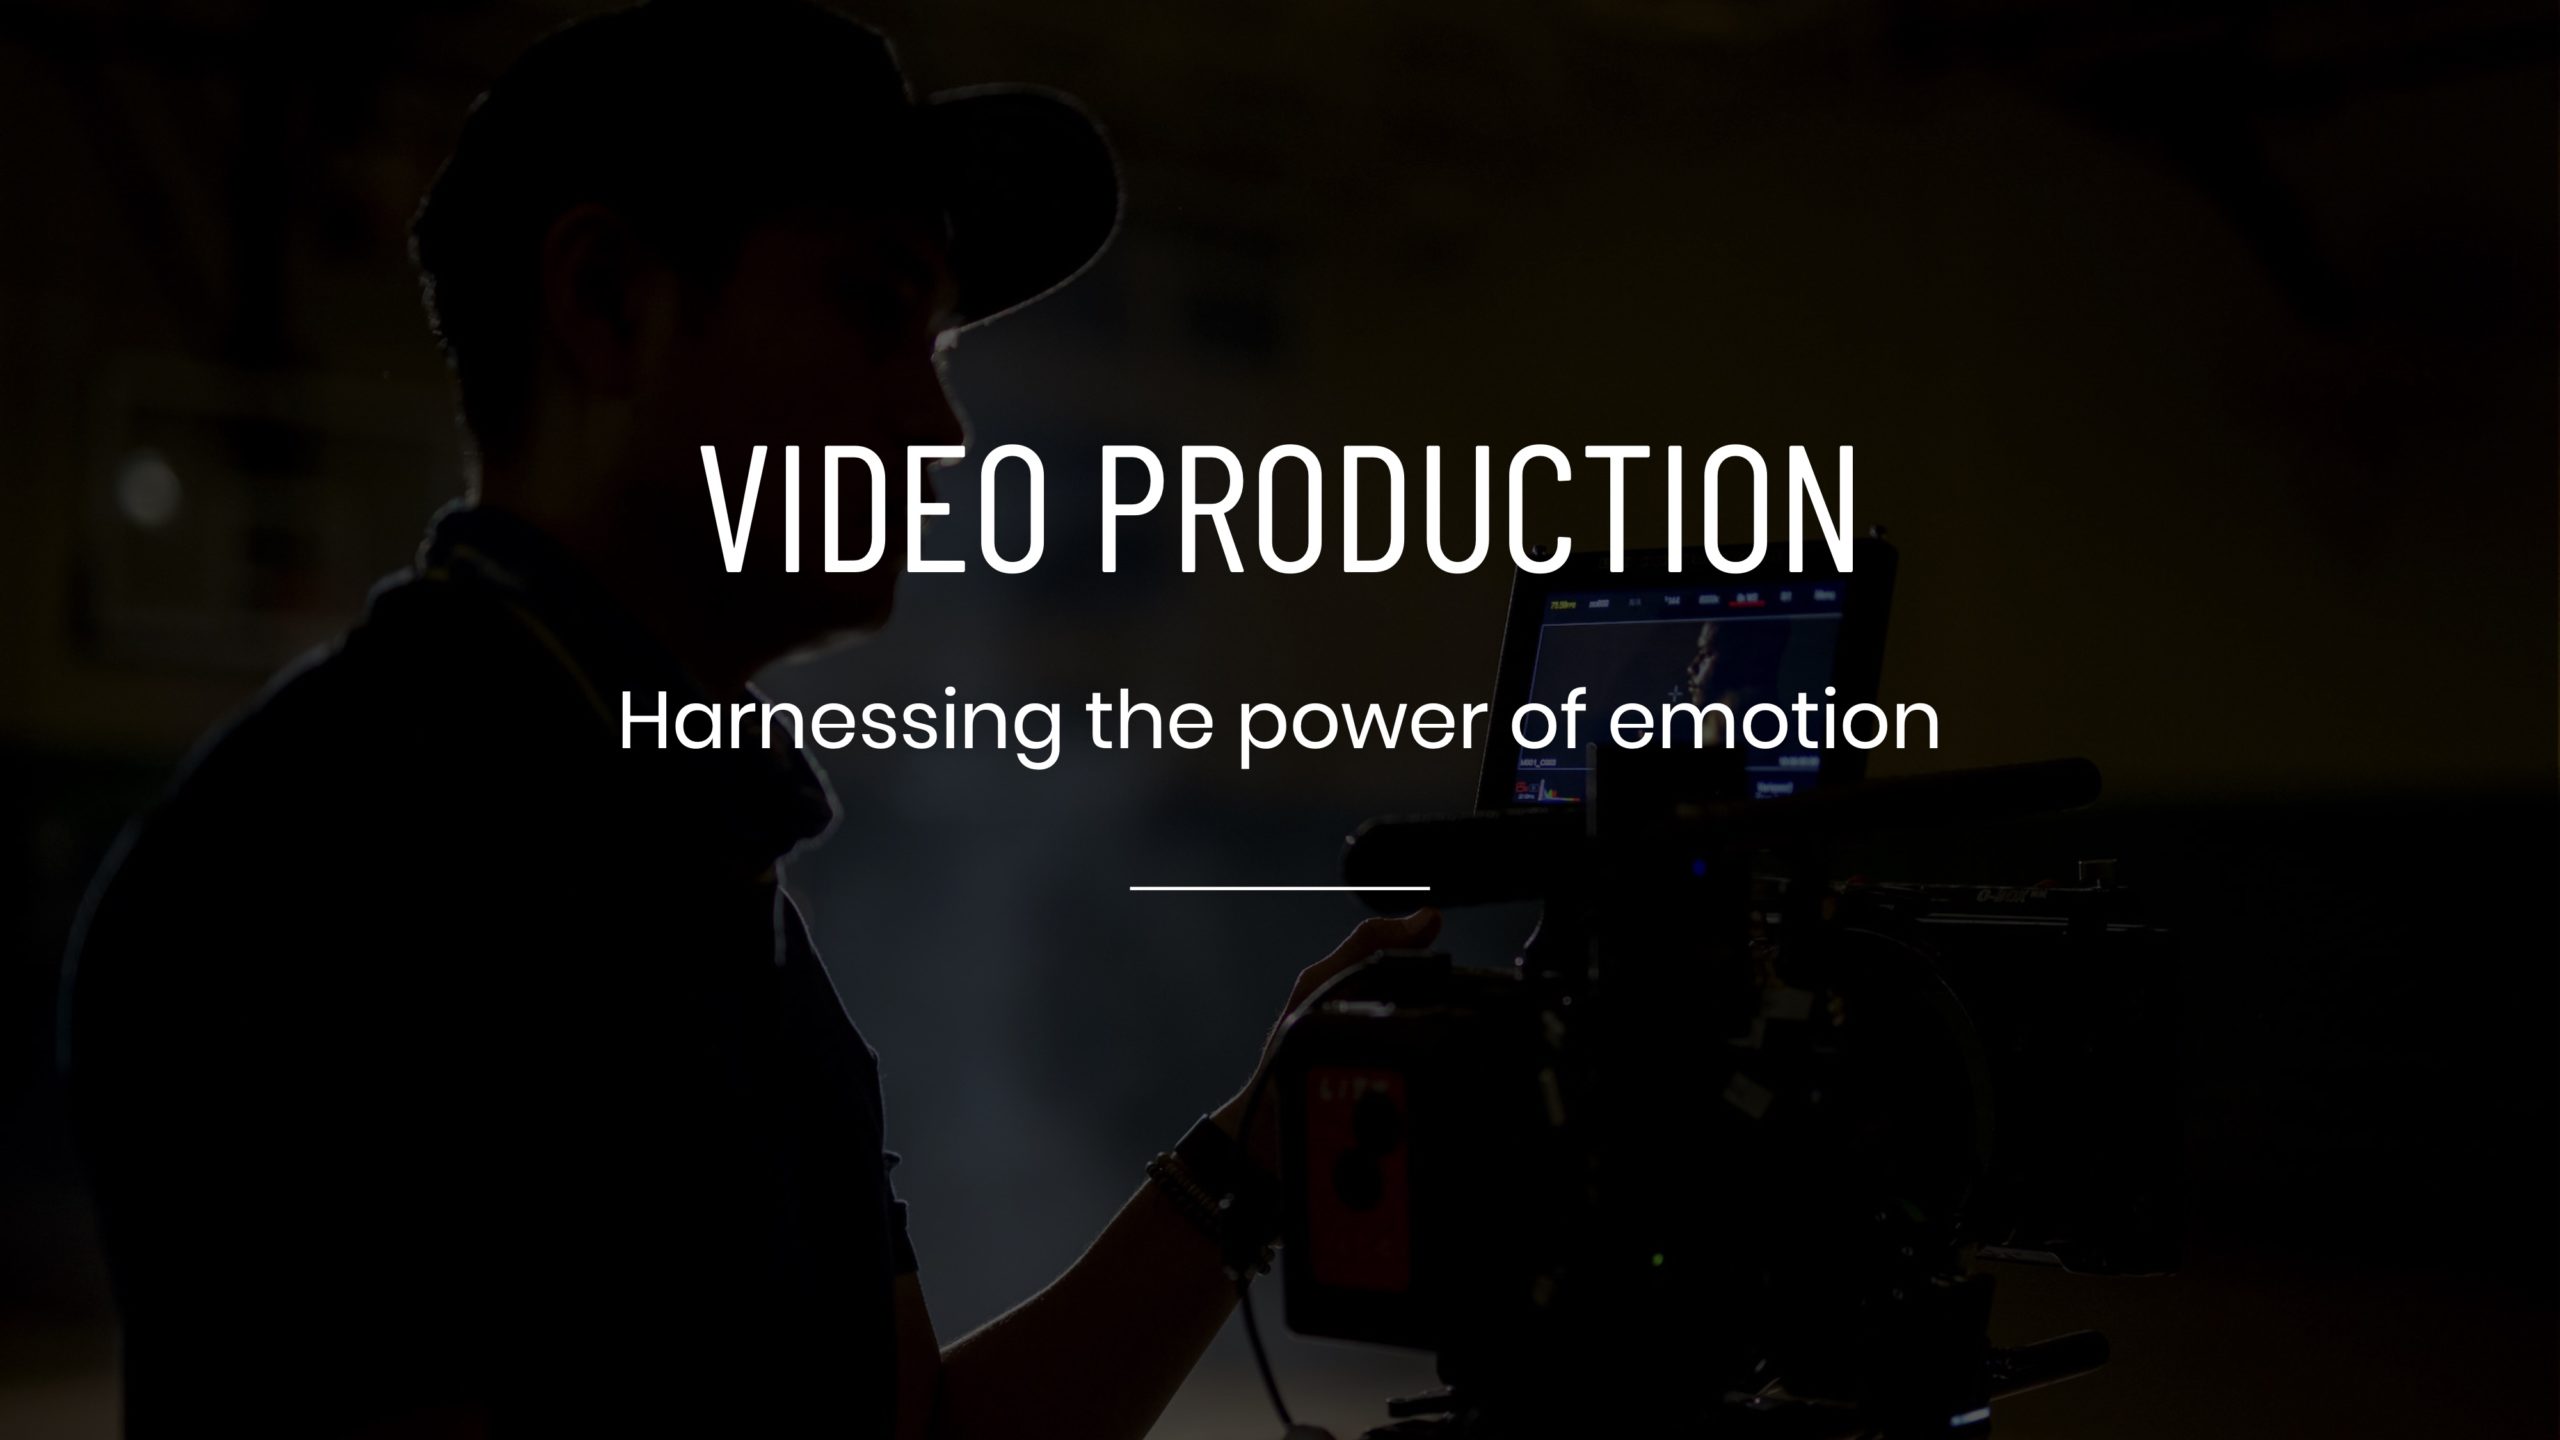 White Video Production Harnessing the Power of Emotion title Service Tile on dimmed background side profile of videographer using a video camera